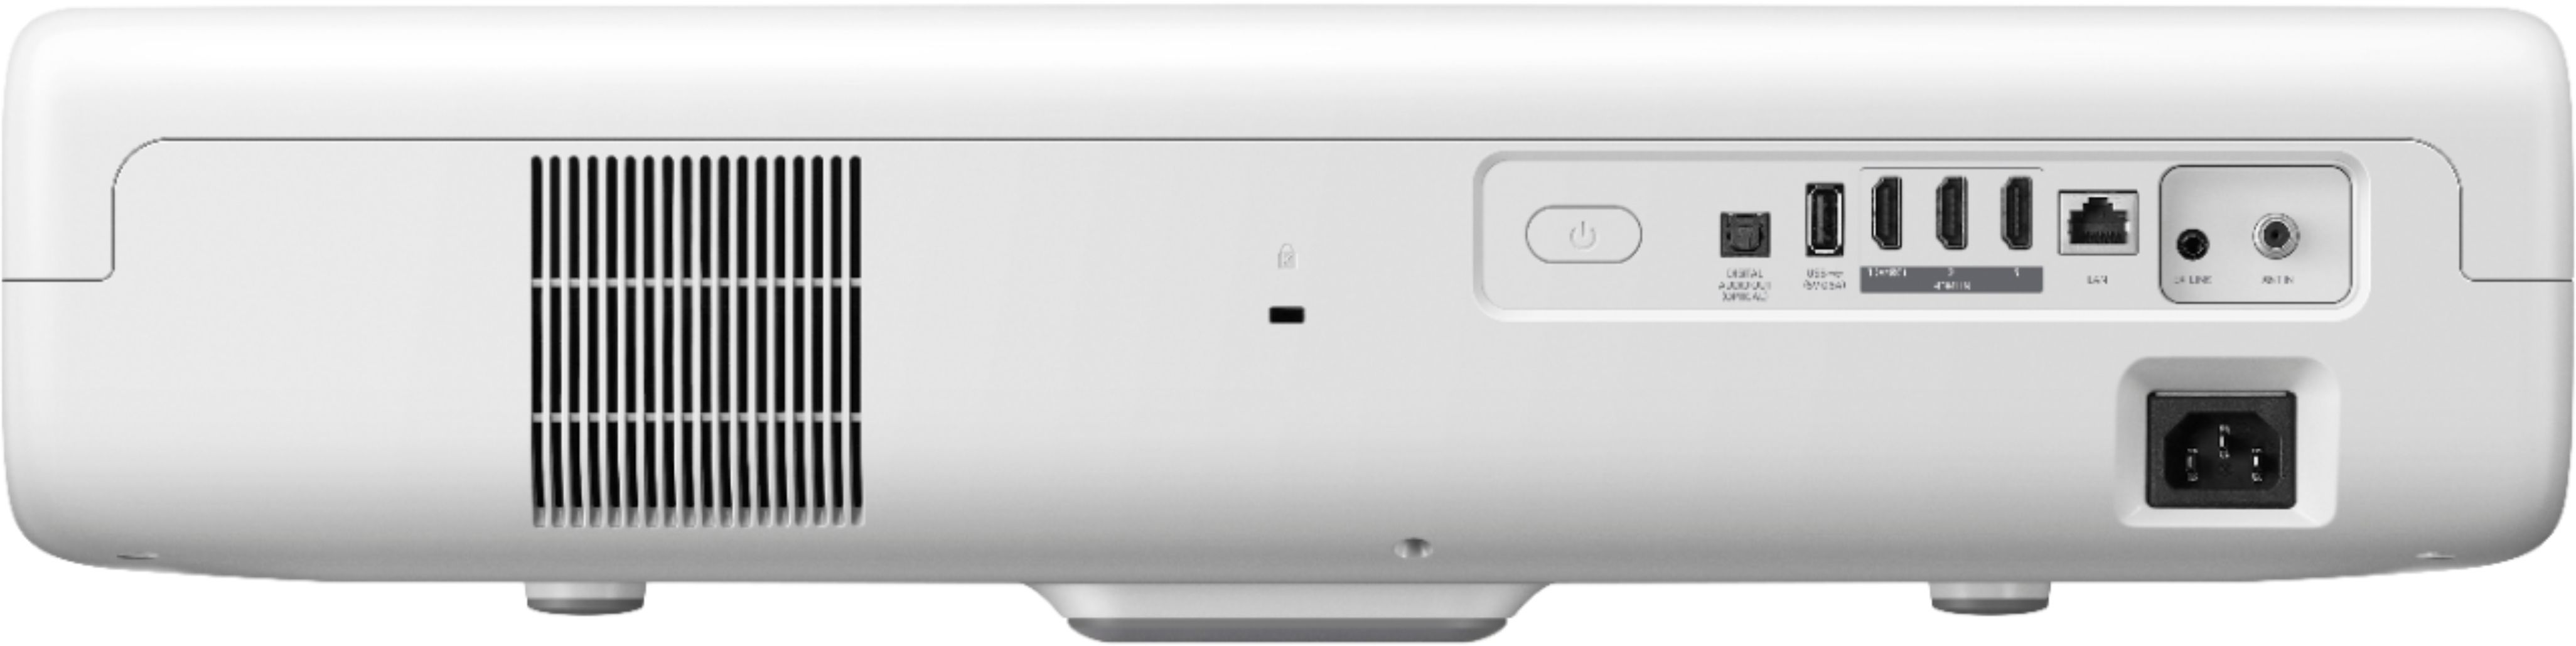 Back View: Samsung - The Premiere 4K UHD Single Laser Wireless Smart Ultra Short Throw Projector with High Dynamic Range - White